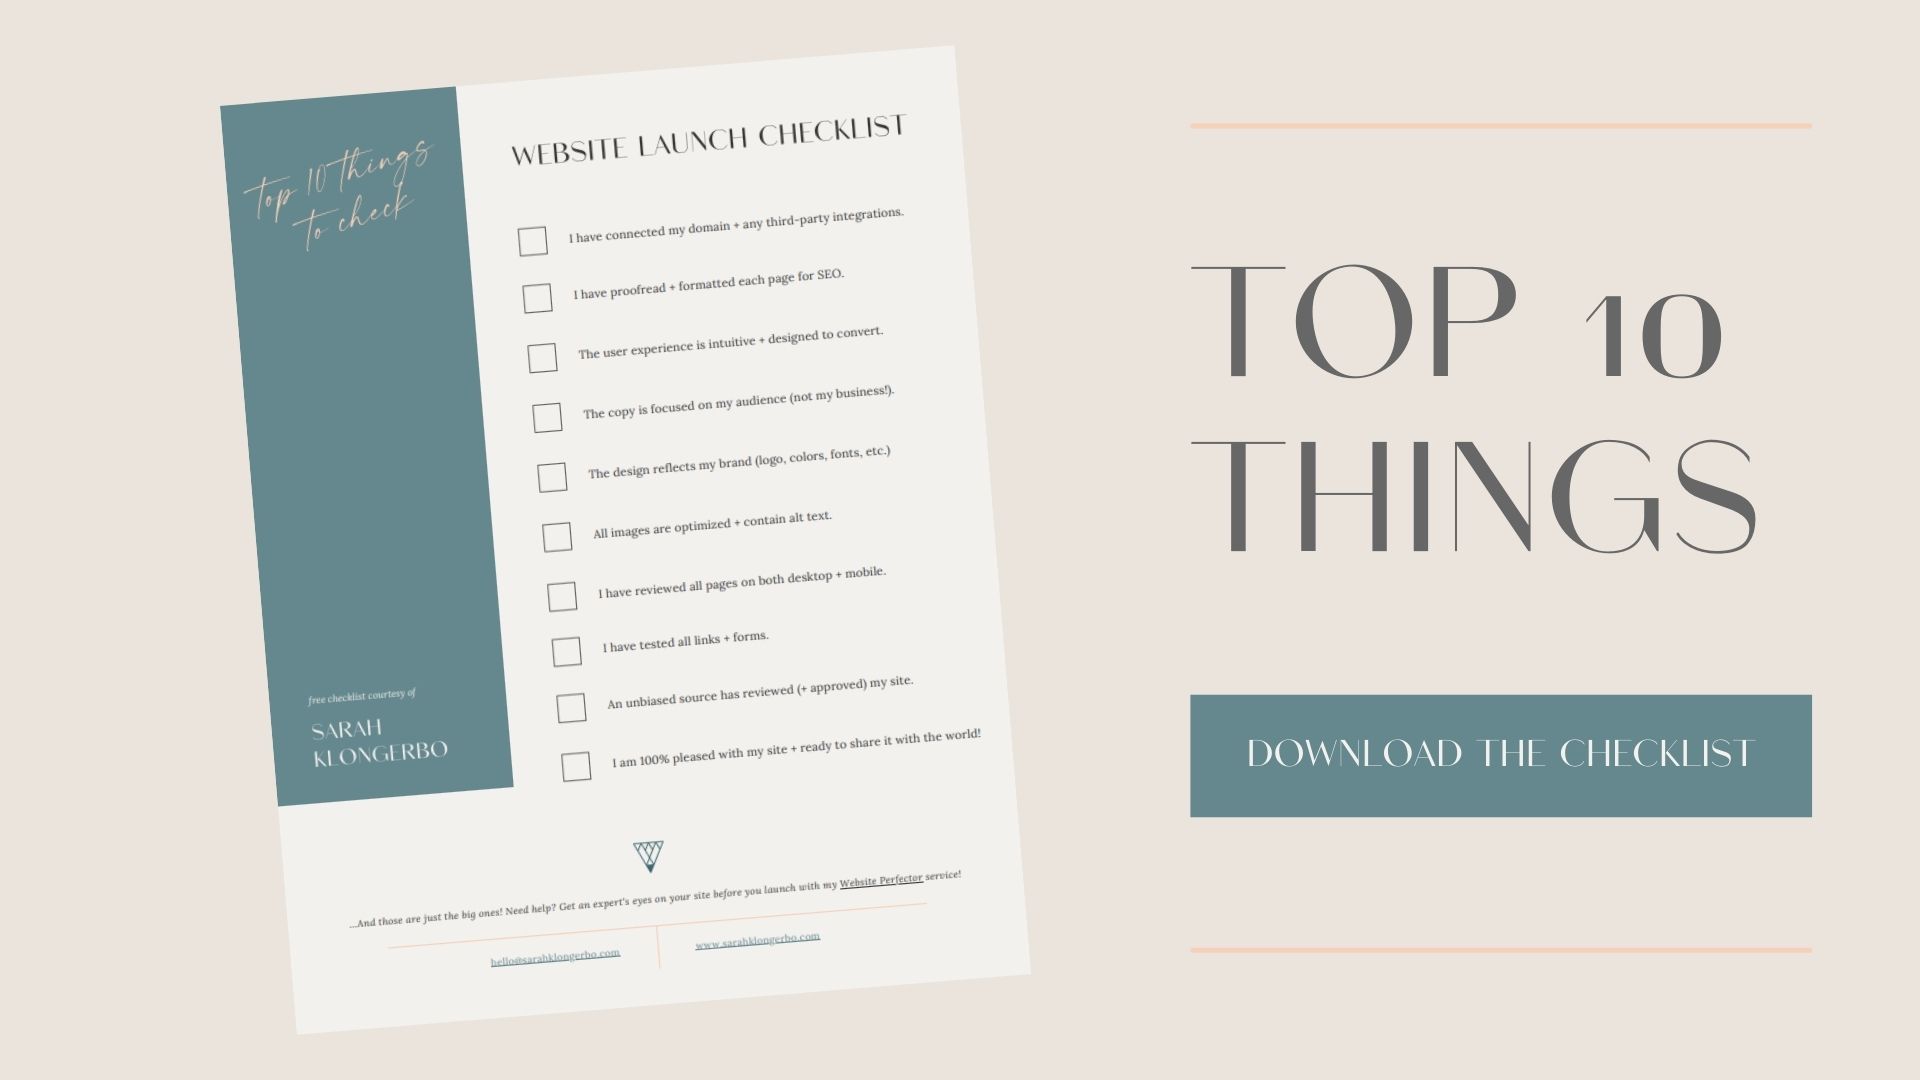 Free Website Launch Checklist for Creatives